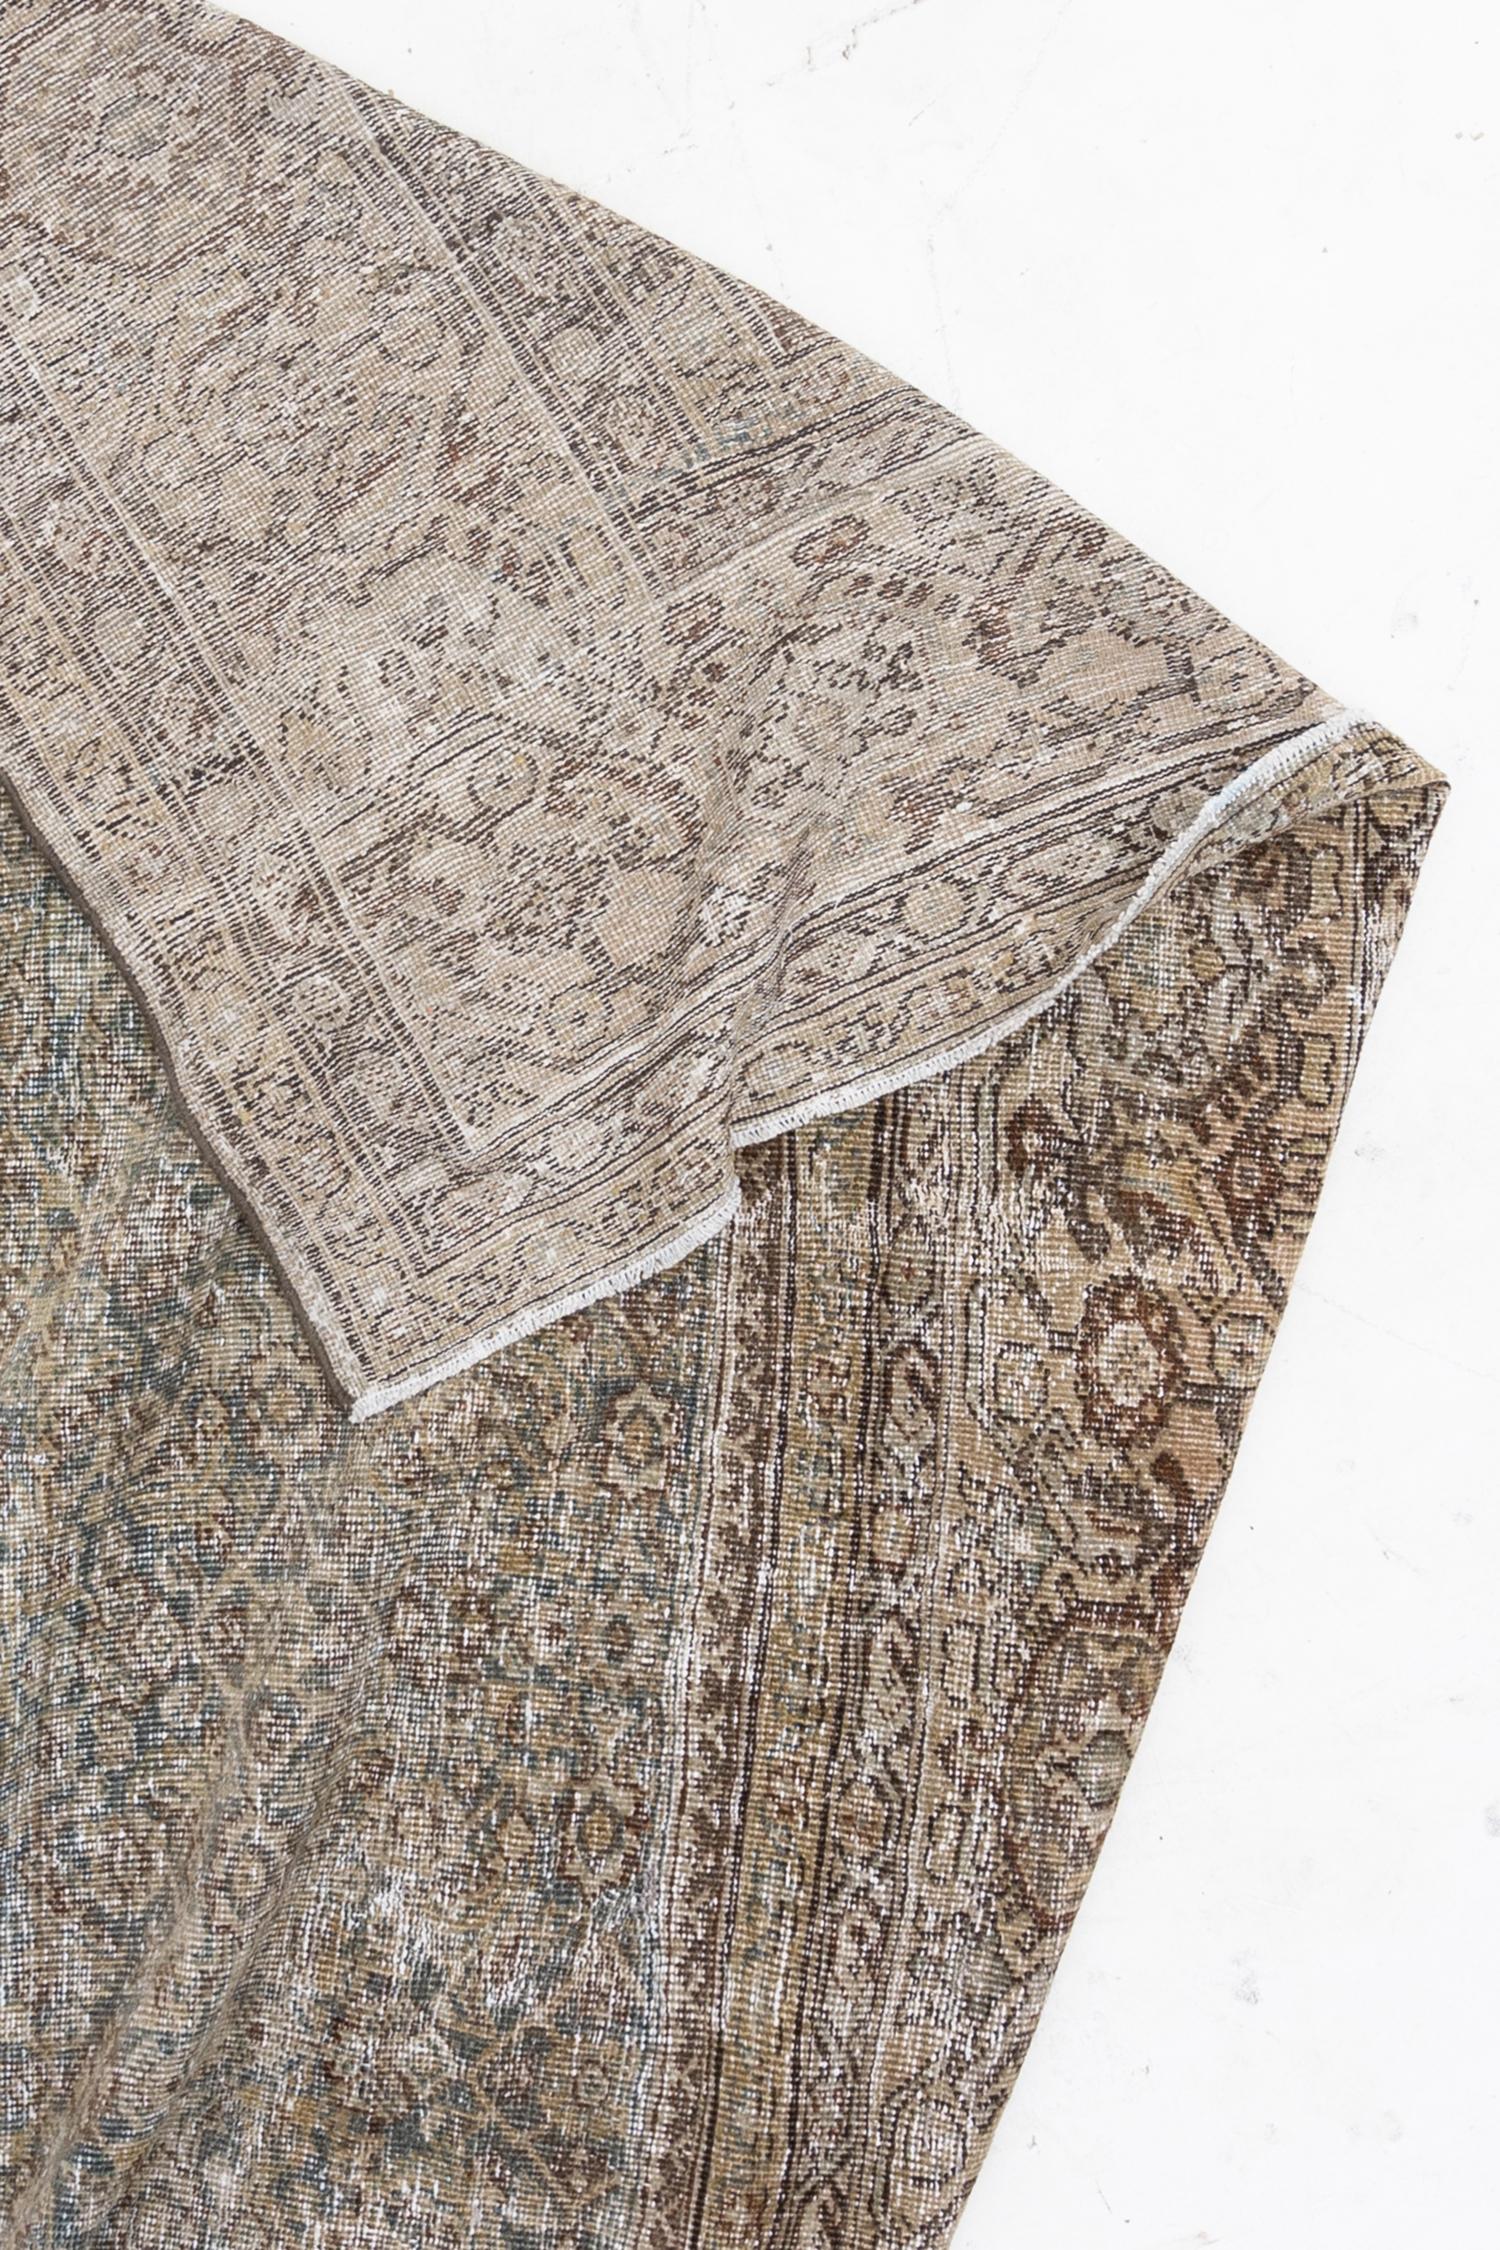 Hand-Woven Distressed Oversize Antique Persian Mahal For Sale